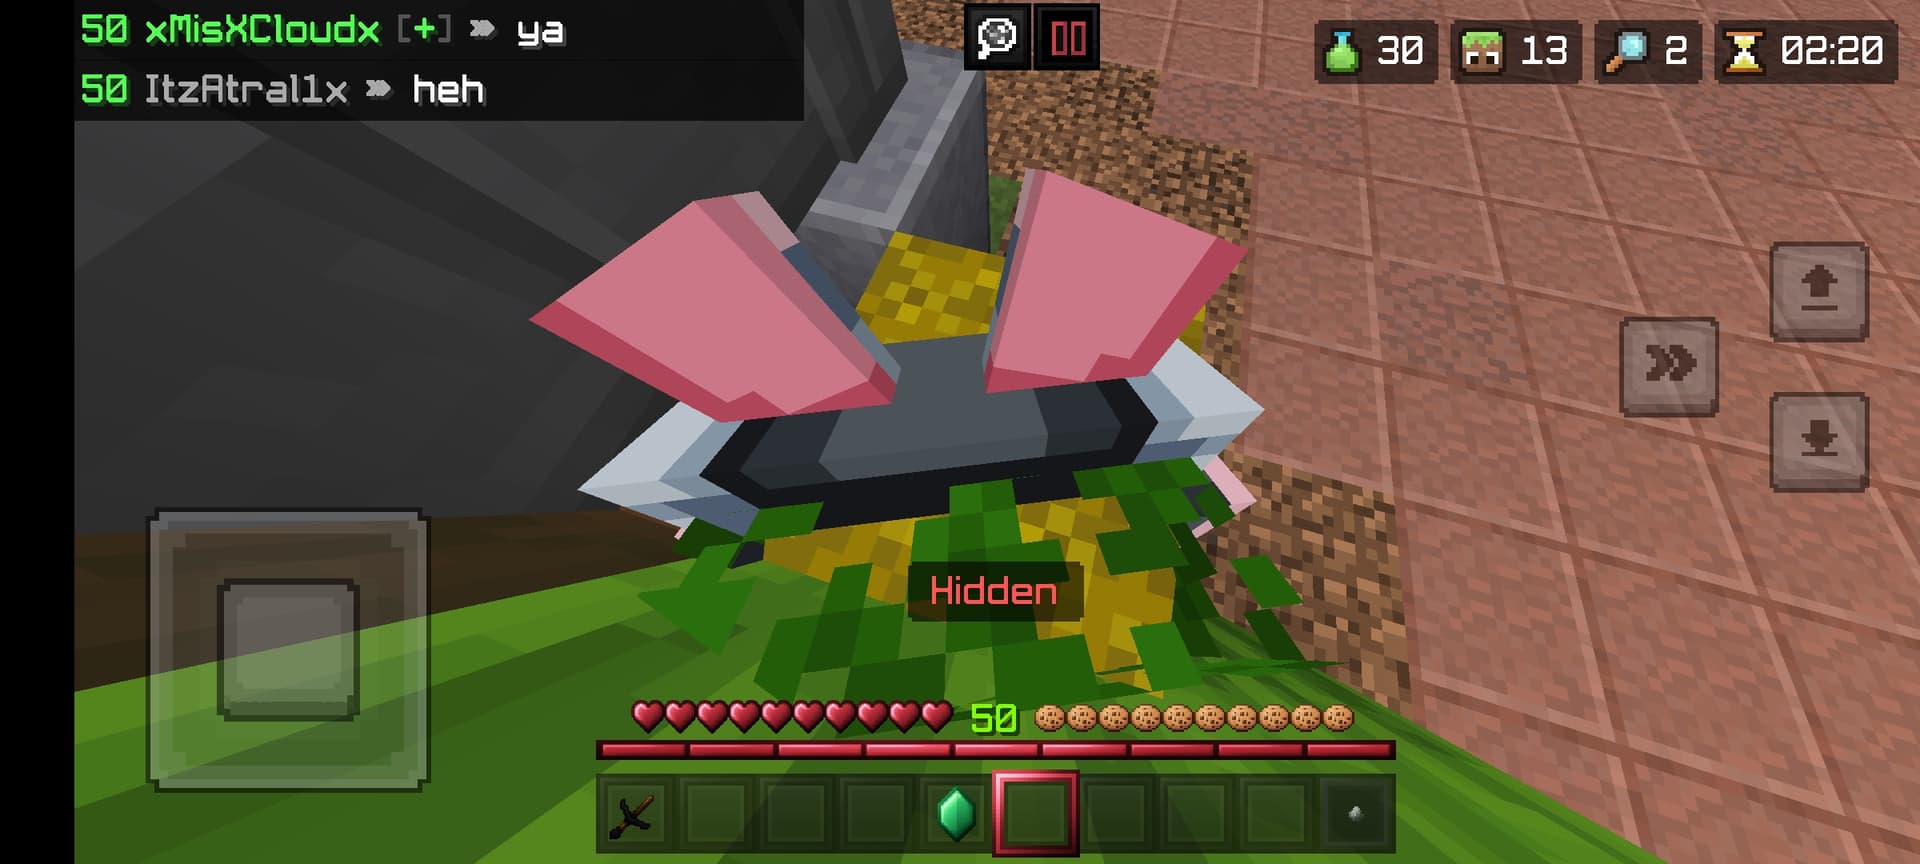 Players NoClipping inside the blocks - Closed Bug Reports - The Hive Forums